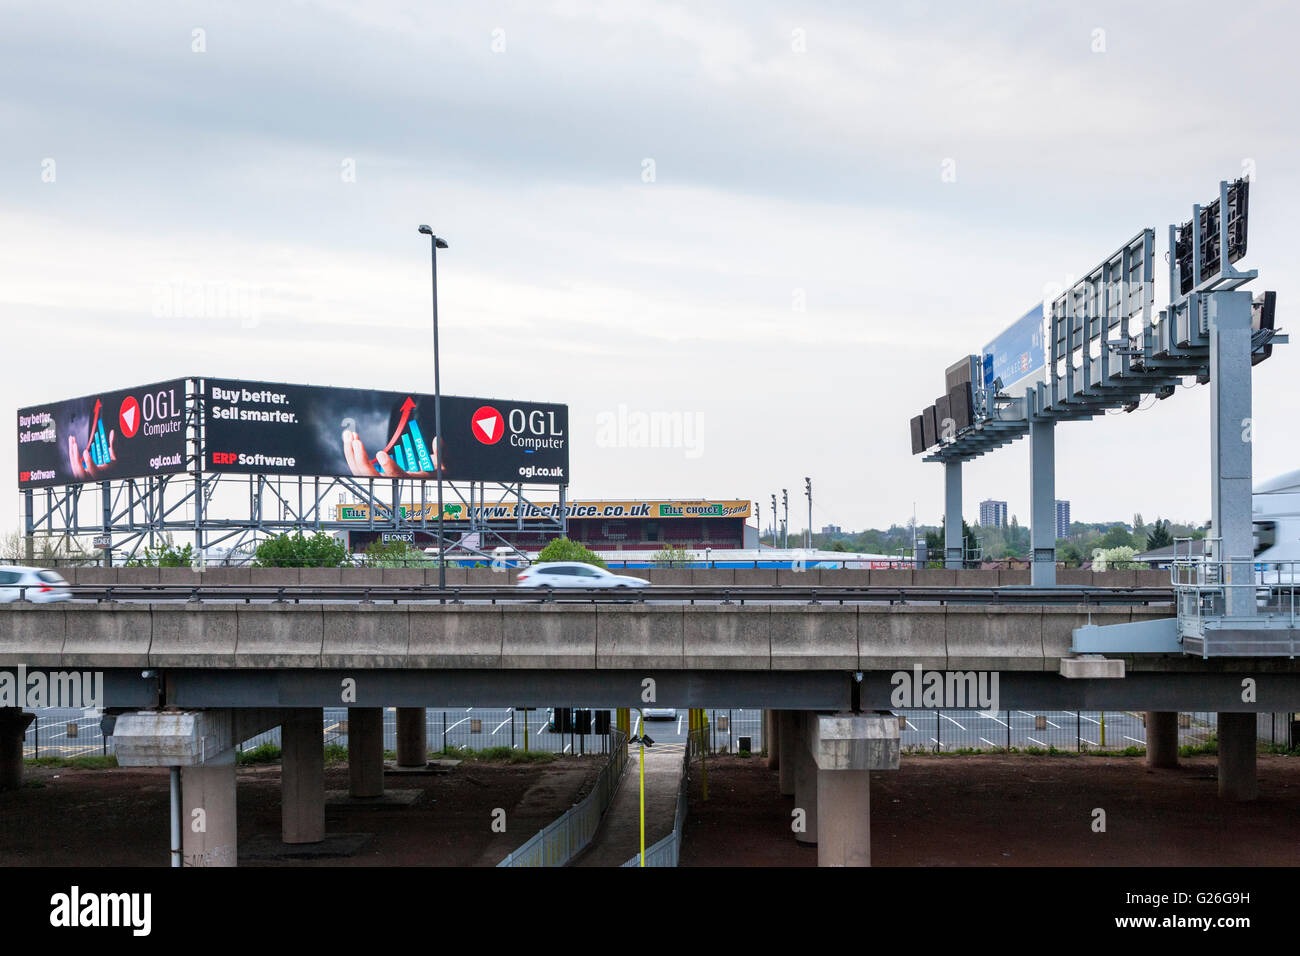 Raised section of the M6 Motorway with gantry and high level electronic advertising billboard at dusk, Bescot, Walsall, West Midlands, England, UK Stock Photo